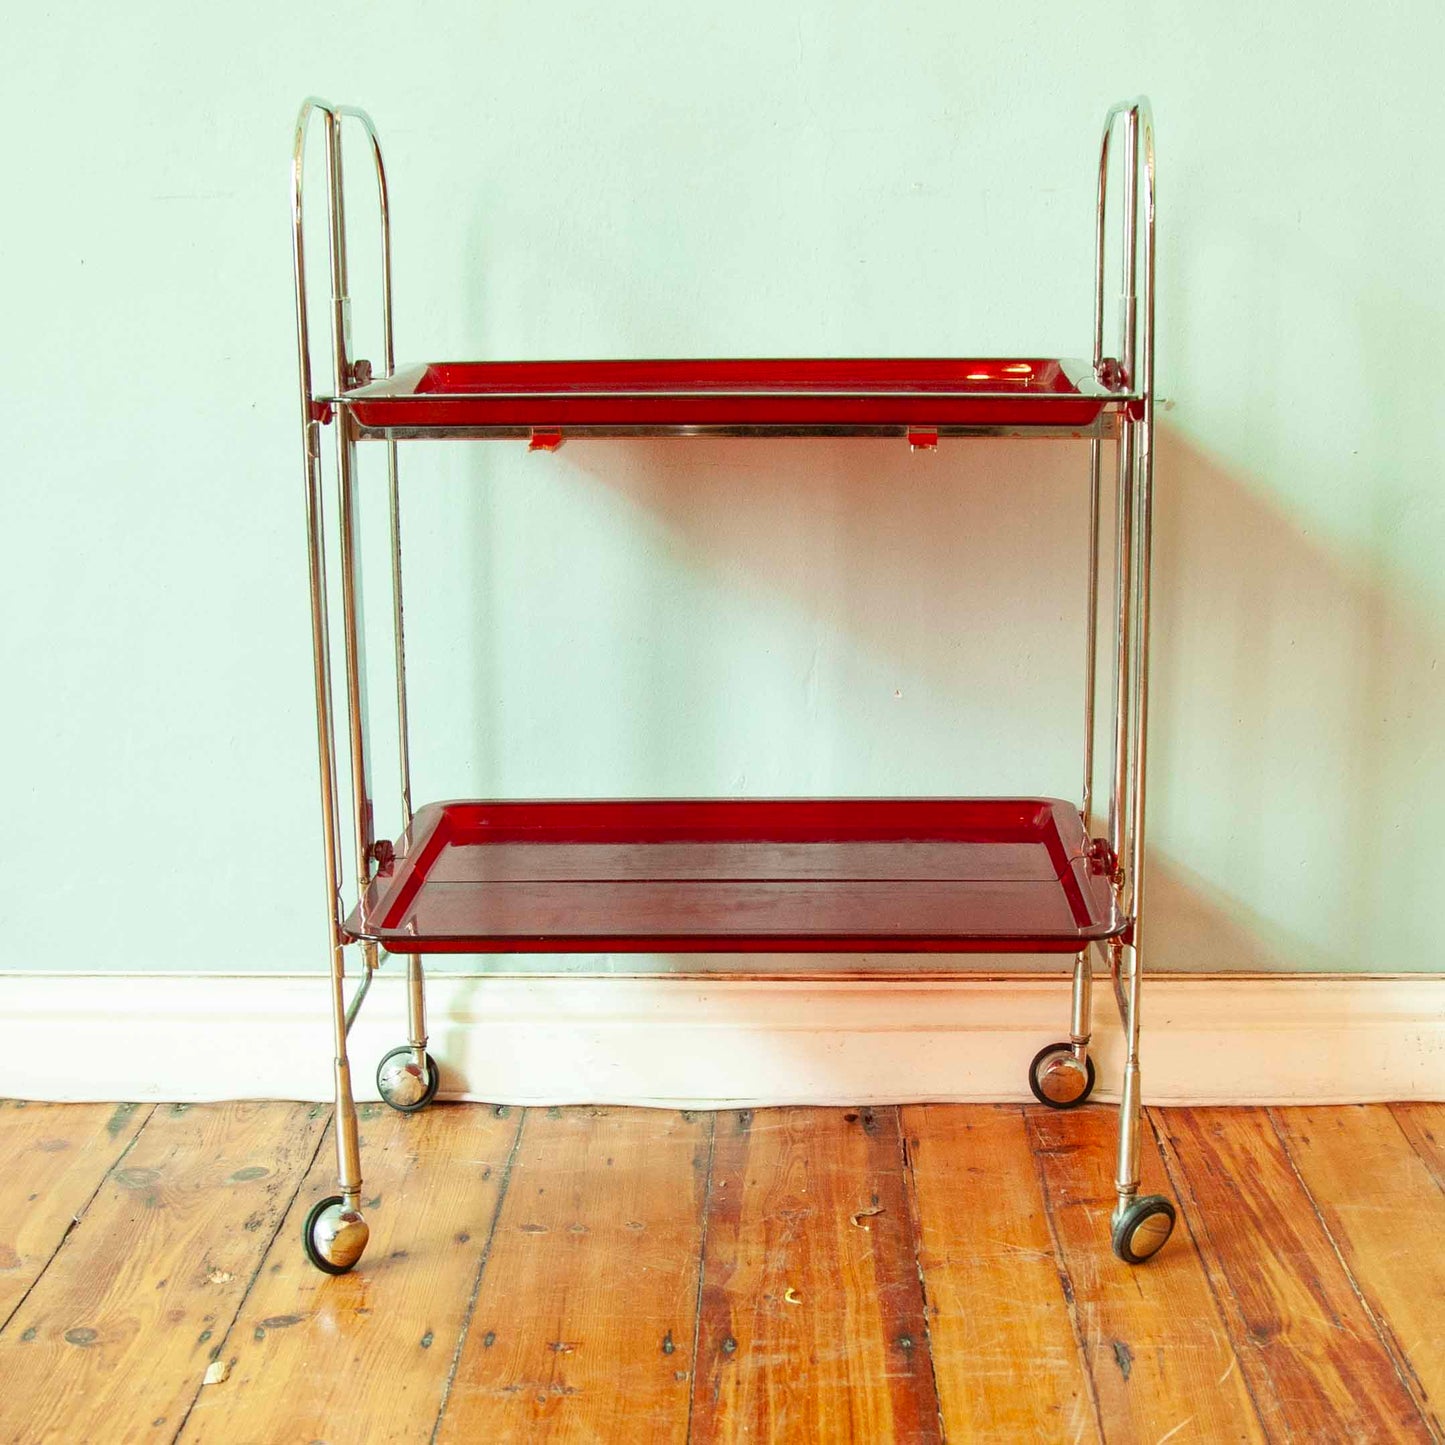 Retro drinks trolley (collapsible)